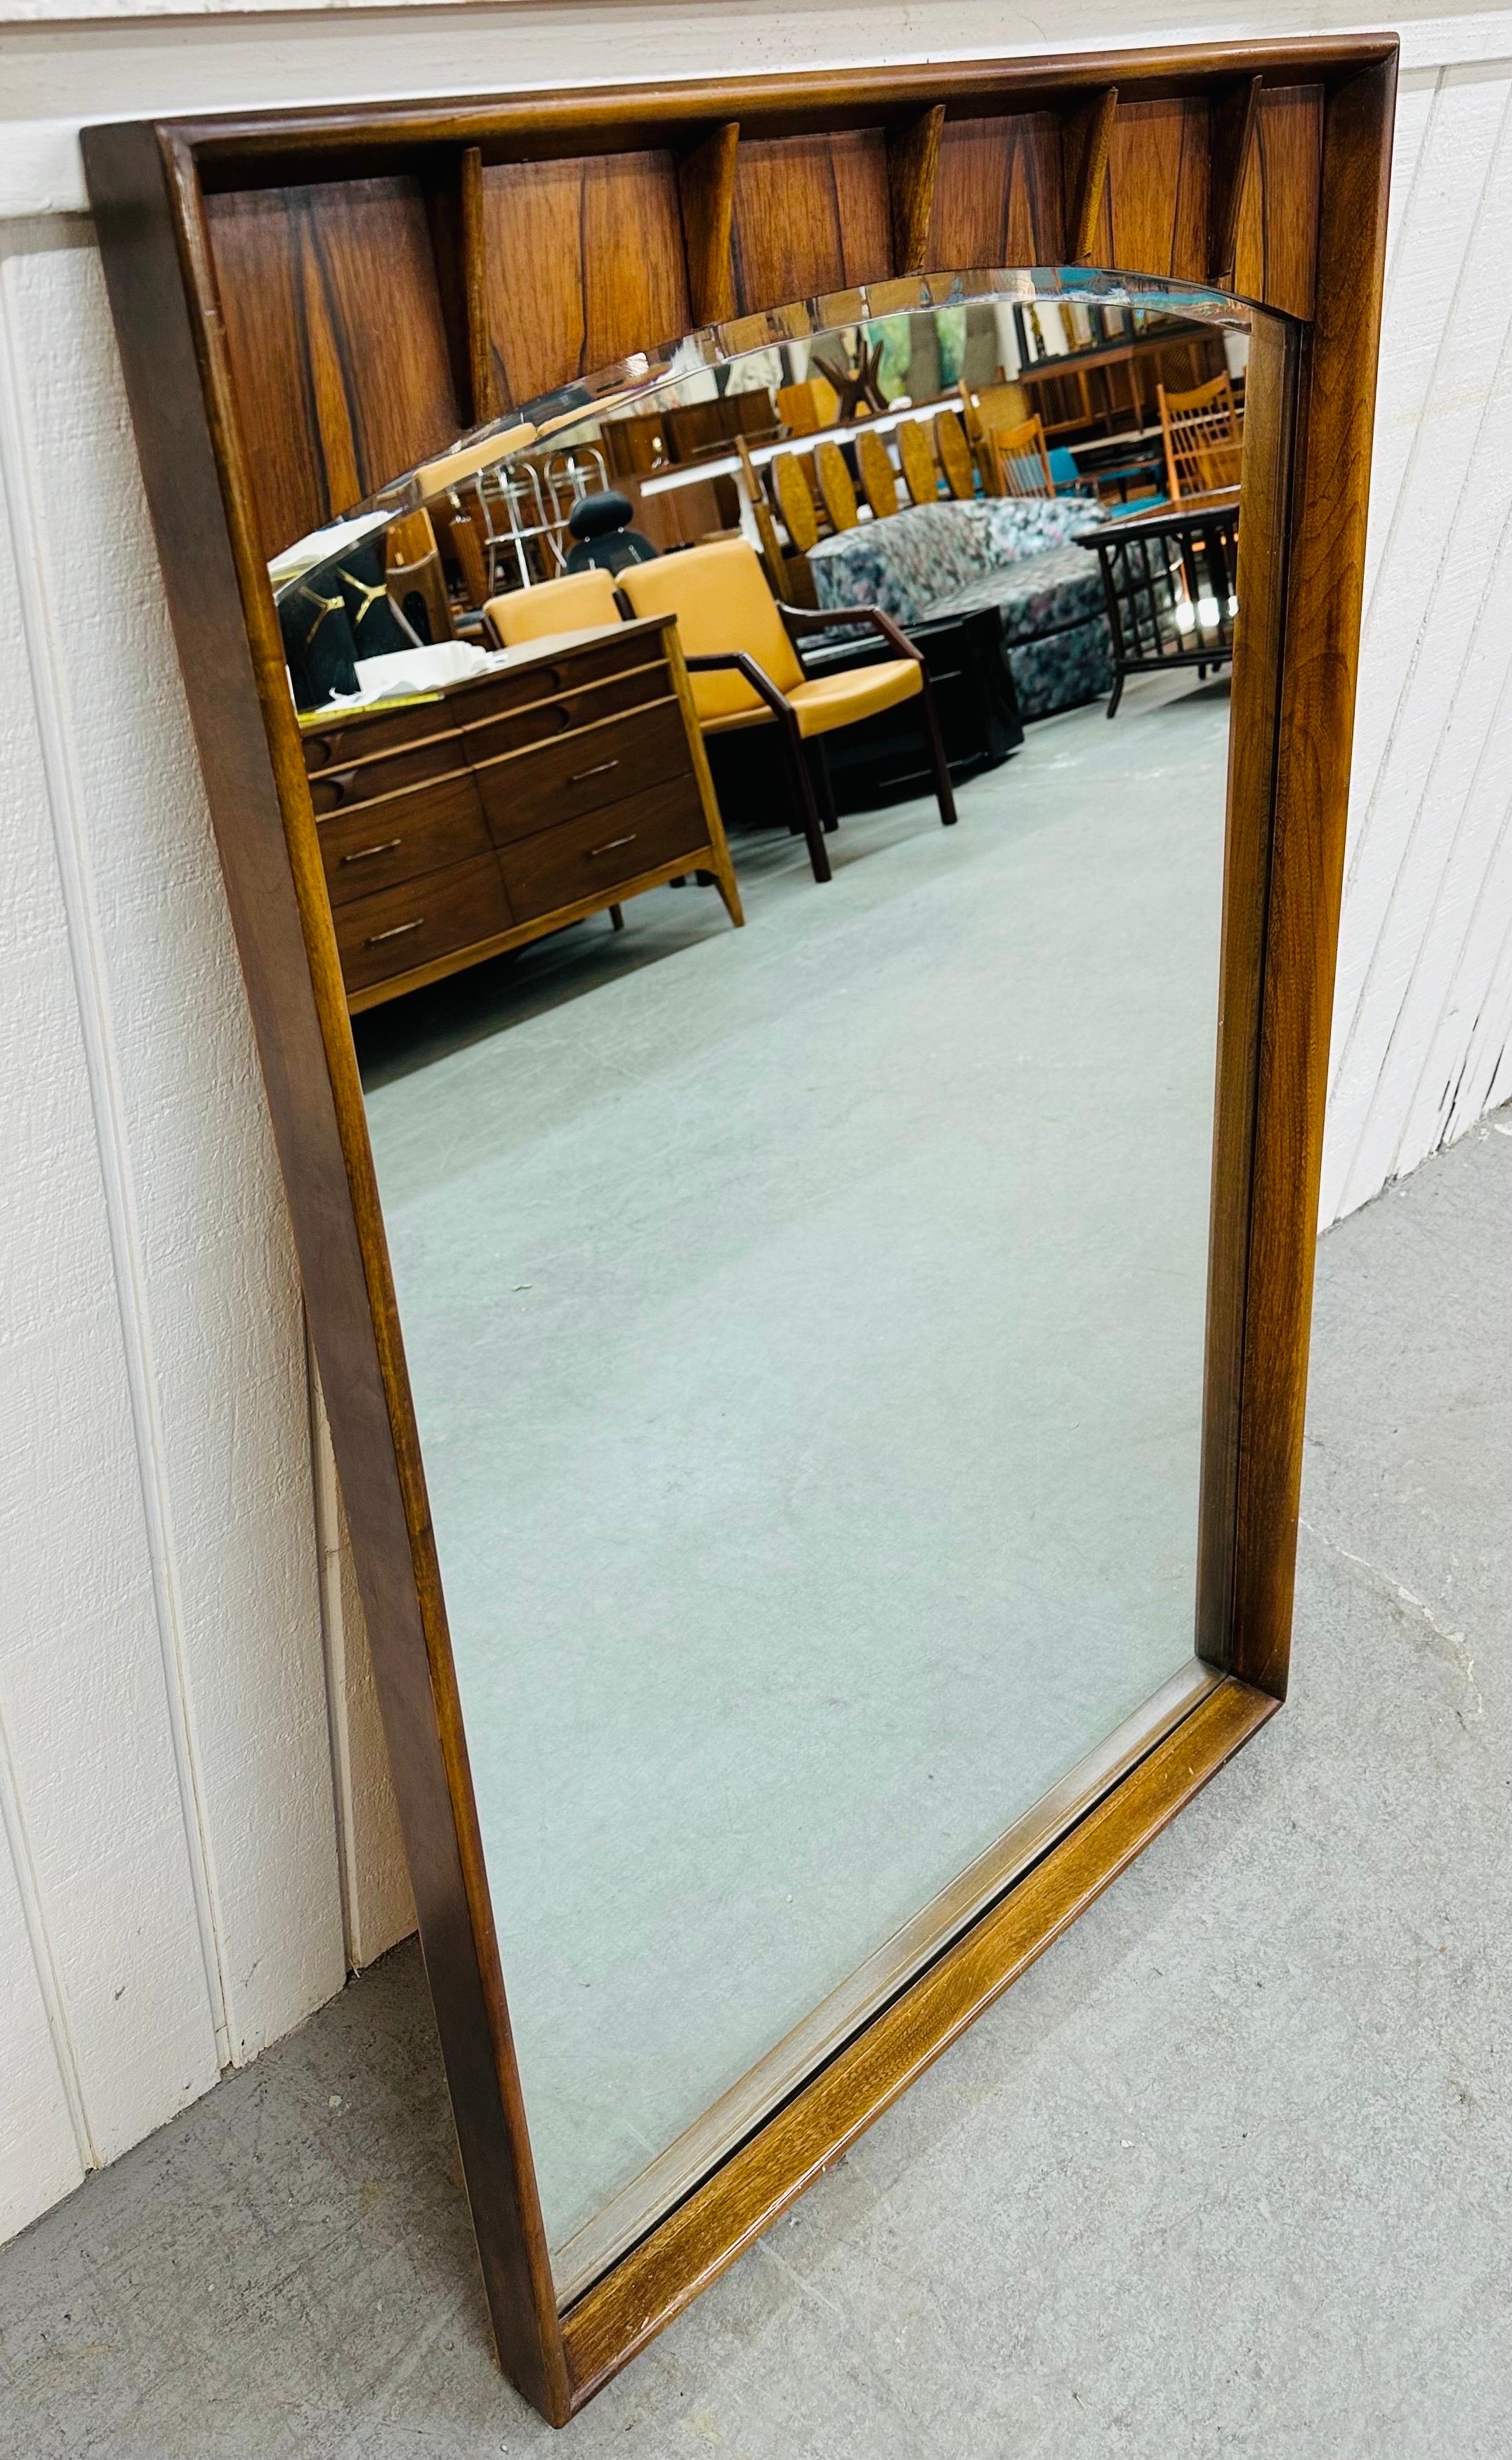 This listing is for a Mid-Century Modern Kent Coffey Perspecta Walnut & Rosewood Mirror. Featuring a straight line rectangular design, solid wood frame, and a beautiful walnut finish. This is an exceptional combination of quality and design by Kent